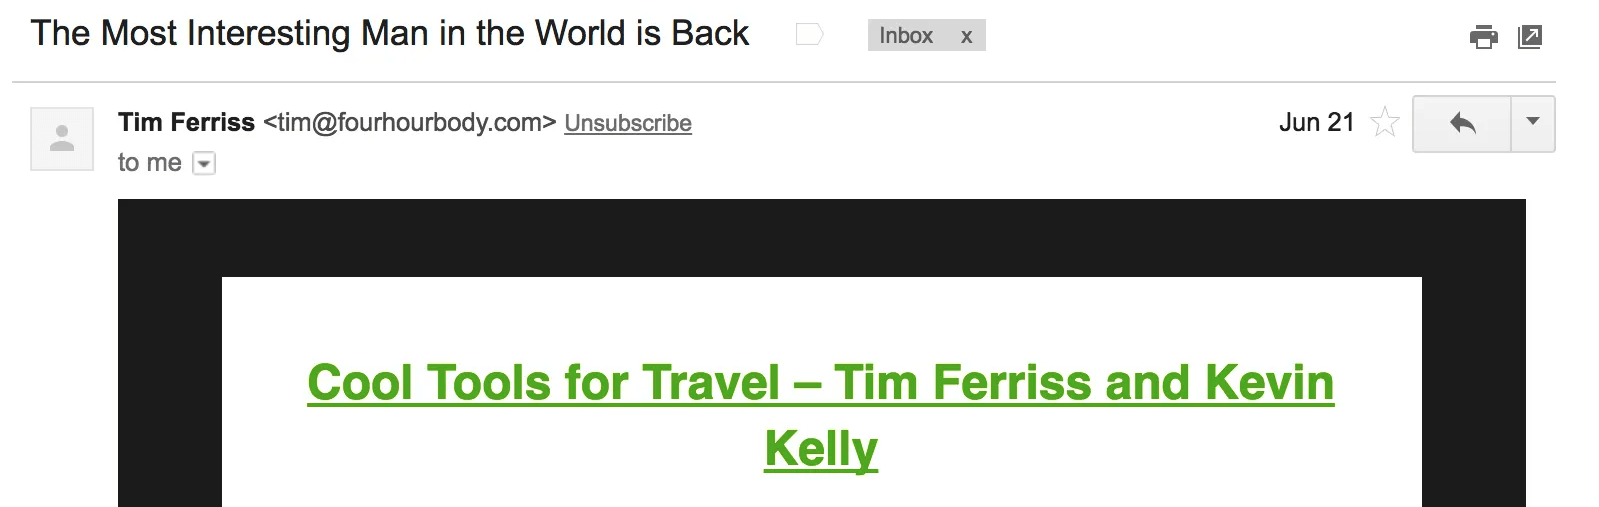 Best Email Subject Lines: Screenshot of email from Tim Ferriss